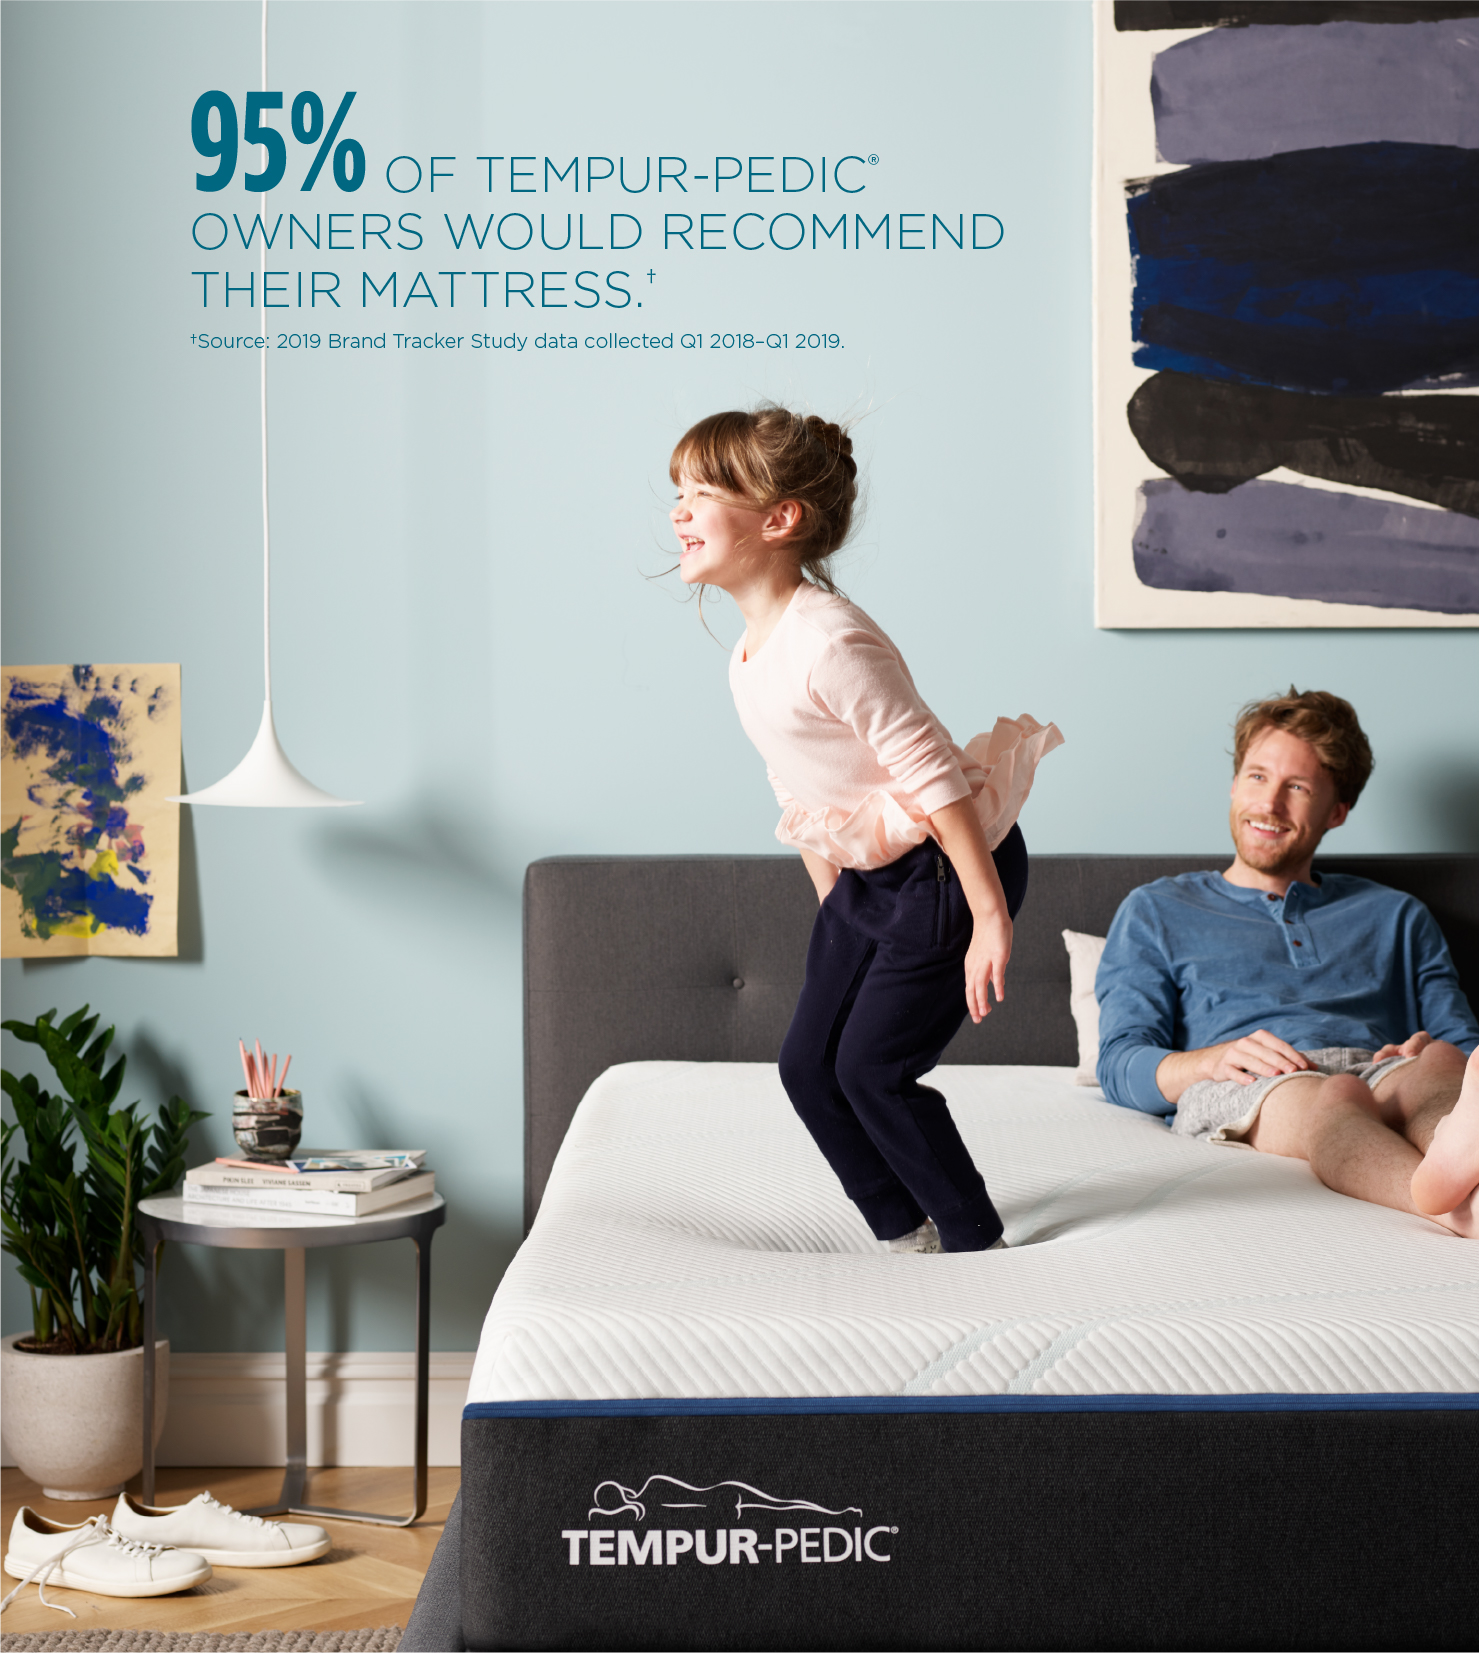 95% of people would recommend their Tempur-Pedic® mattress | Source: 2017 Tempur Sealy Brand Tracker